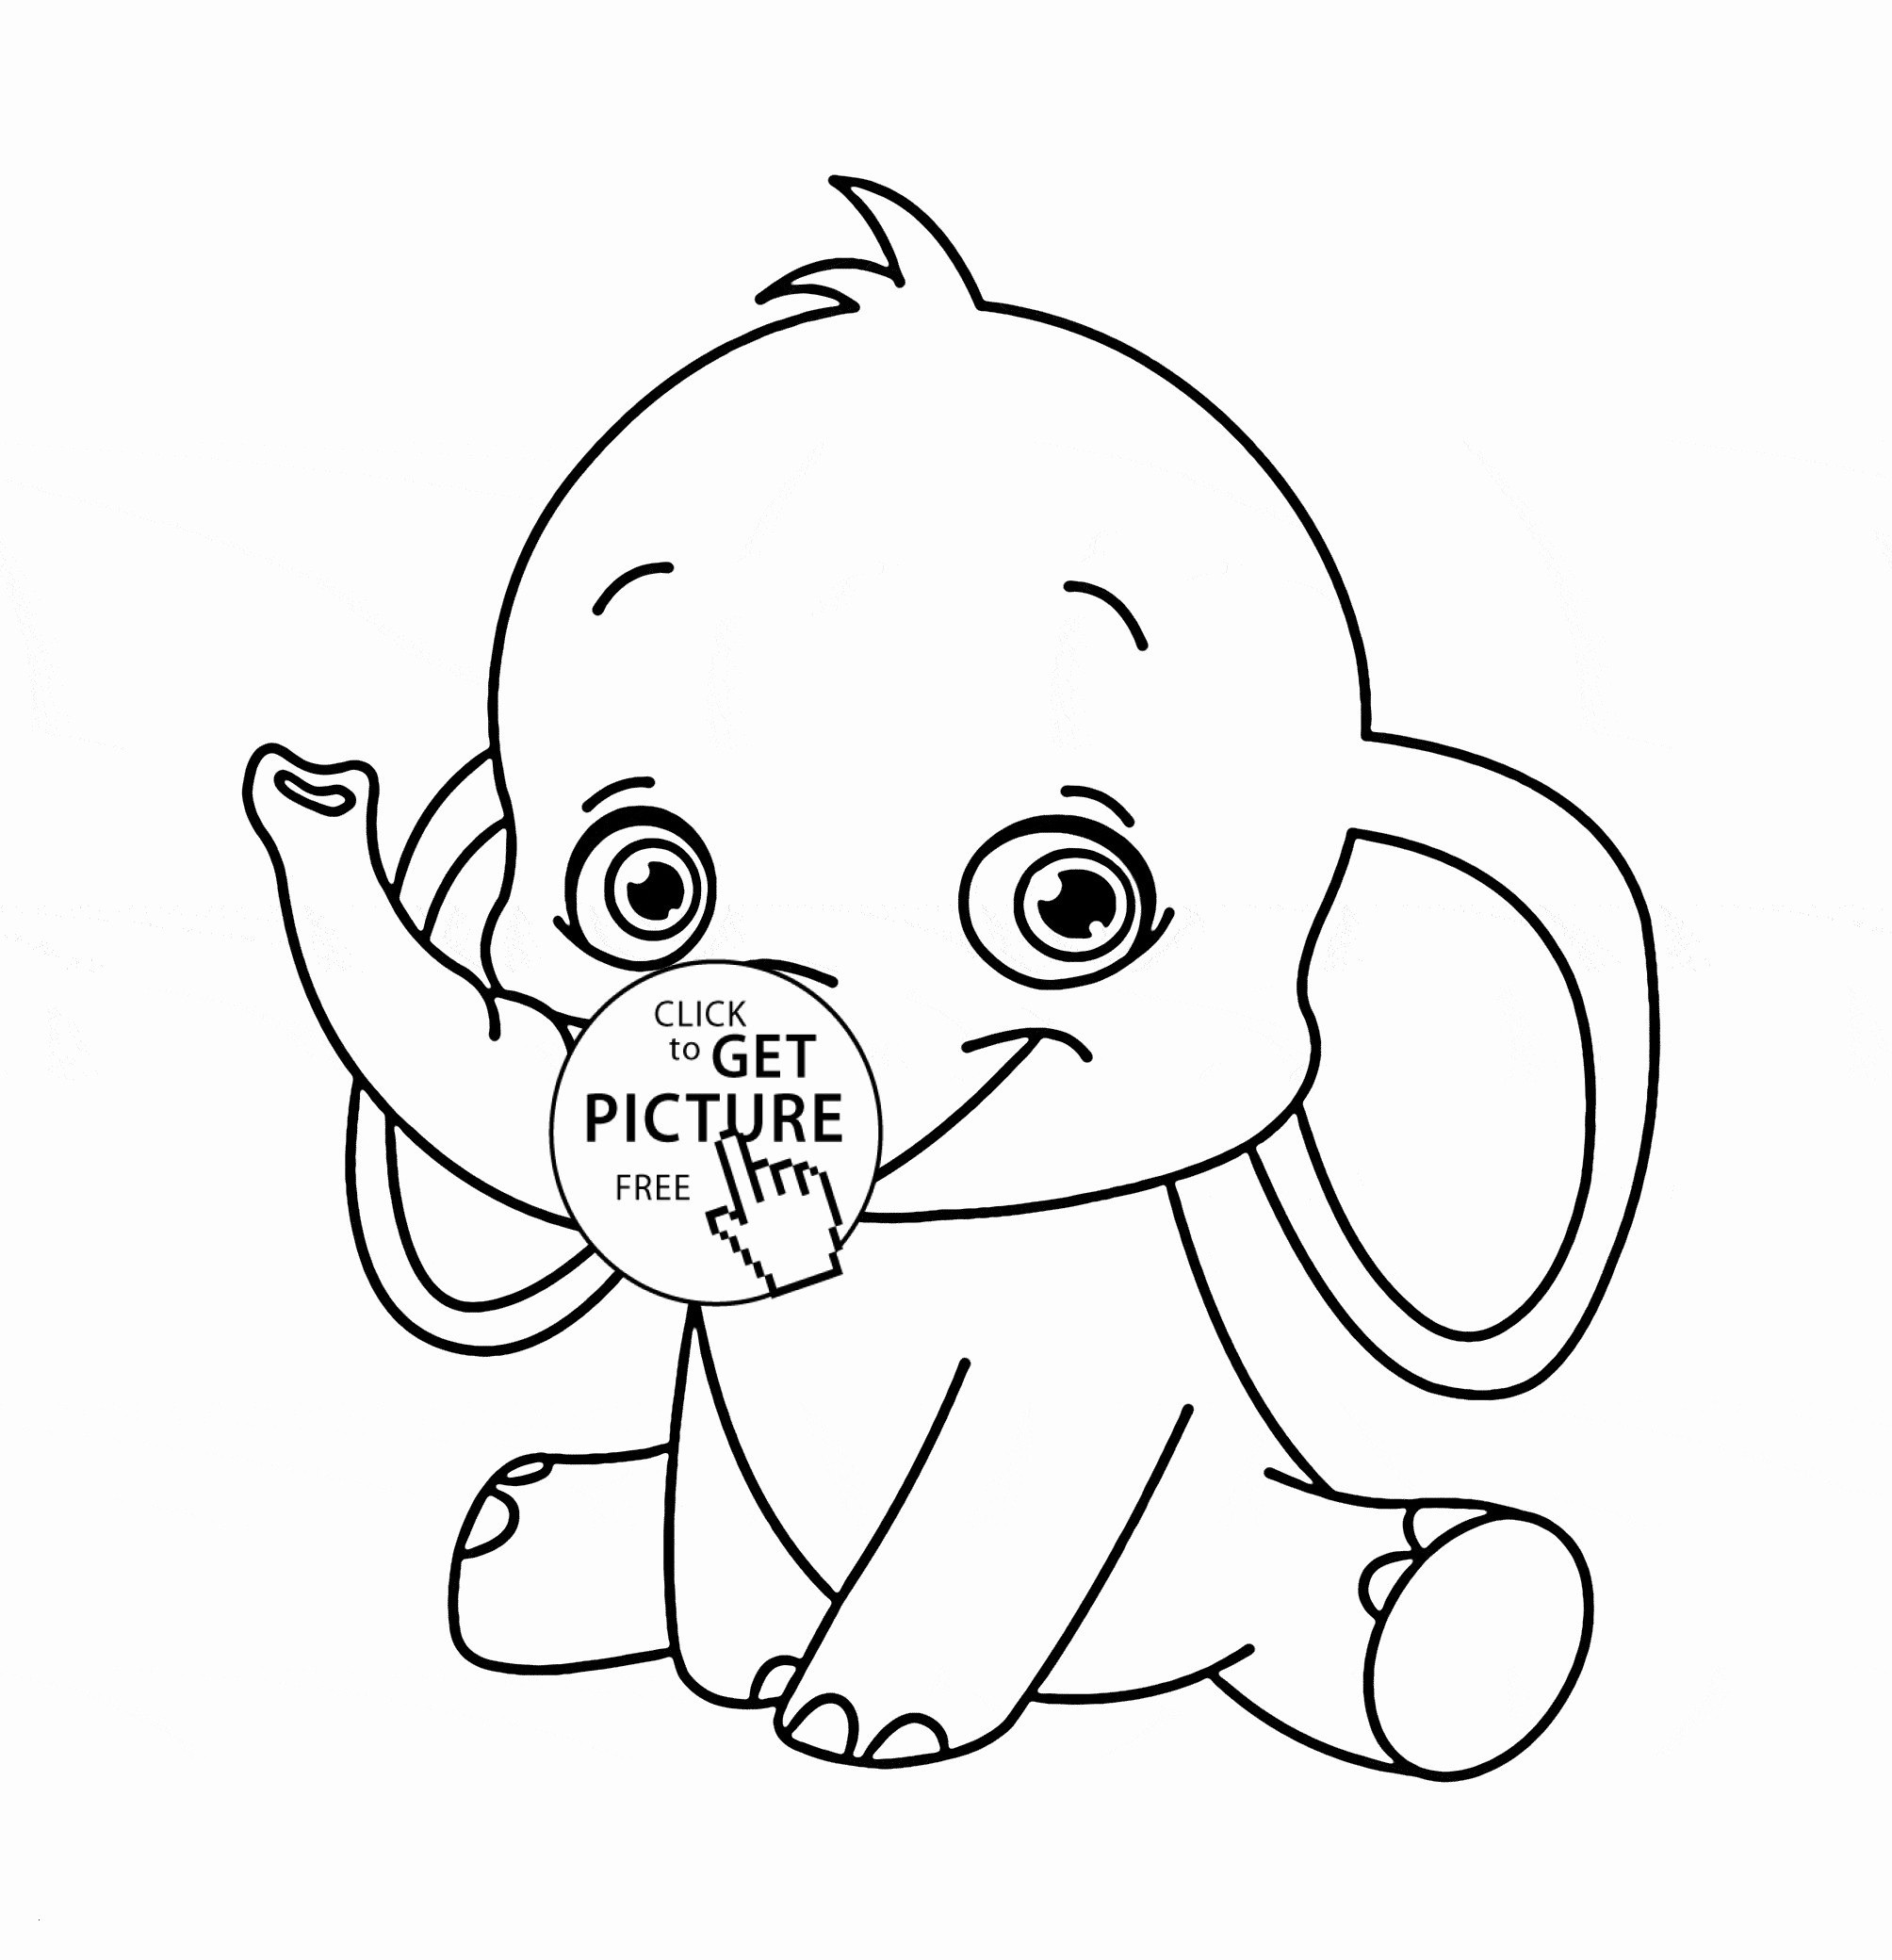 Animals Coloring Page Inspirational Fresh Home Coloring Pages Best Color Sheet 0d – Modokom – Fun